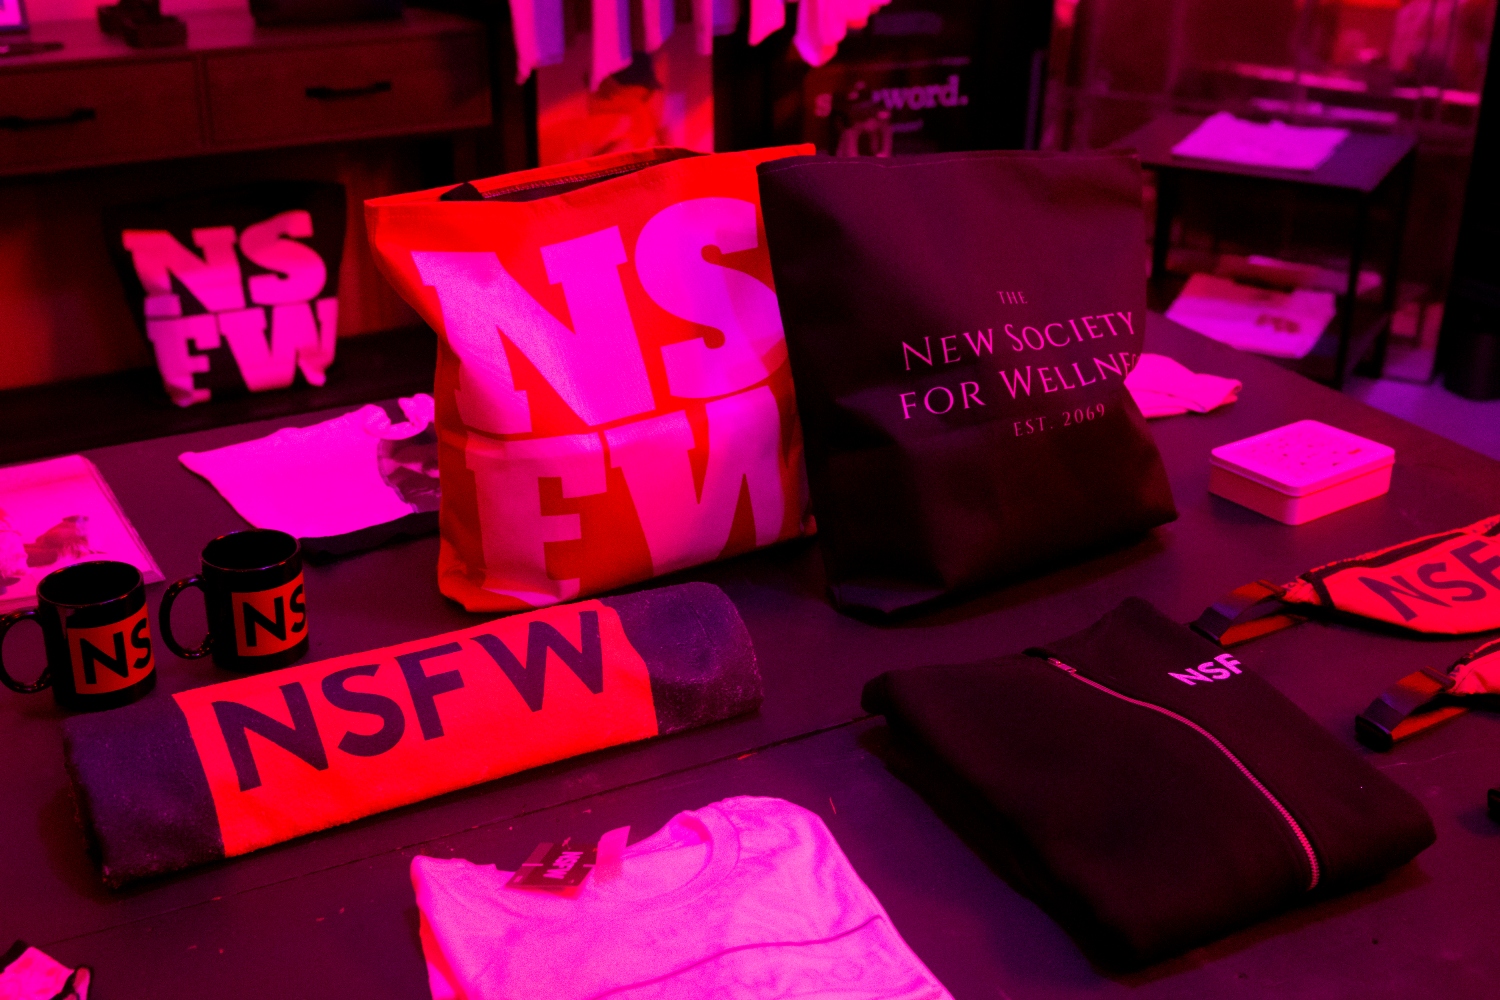 "NSFW" branded merchandise is laid out on a table